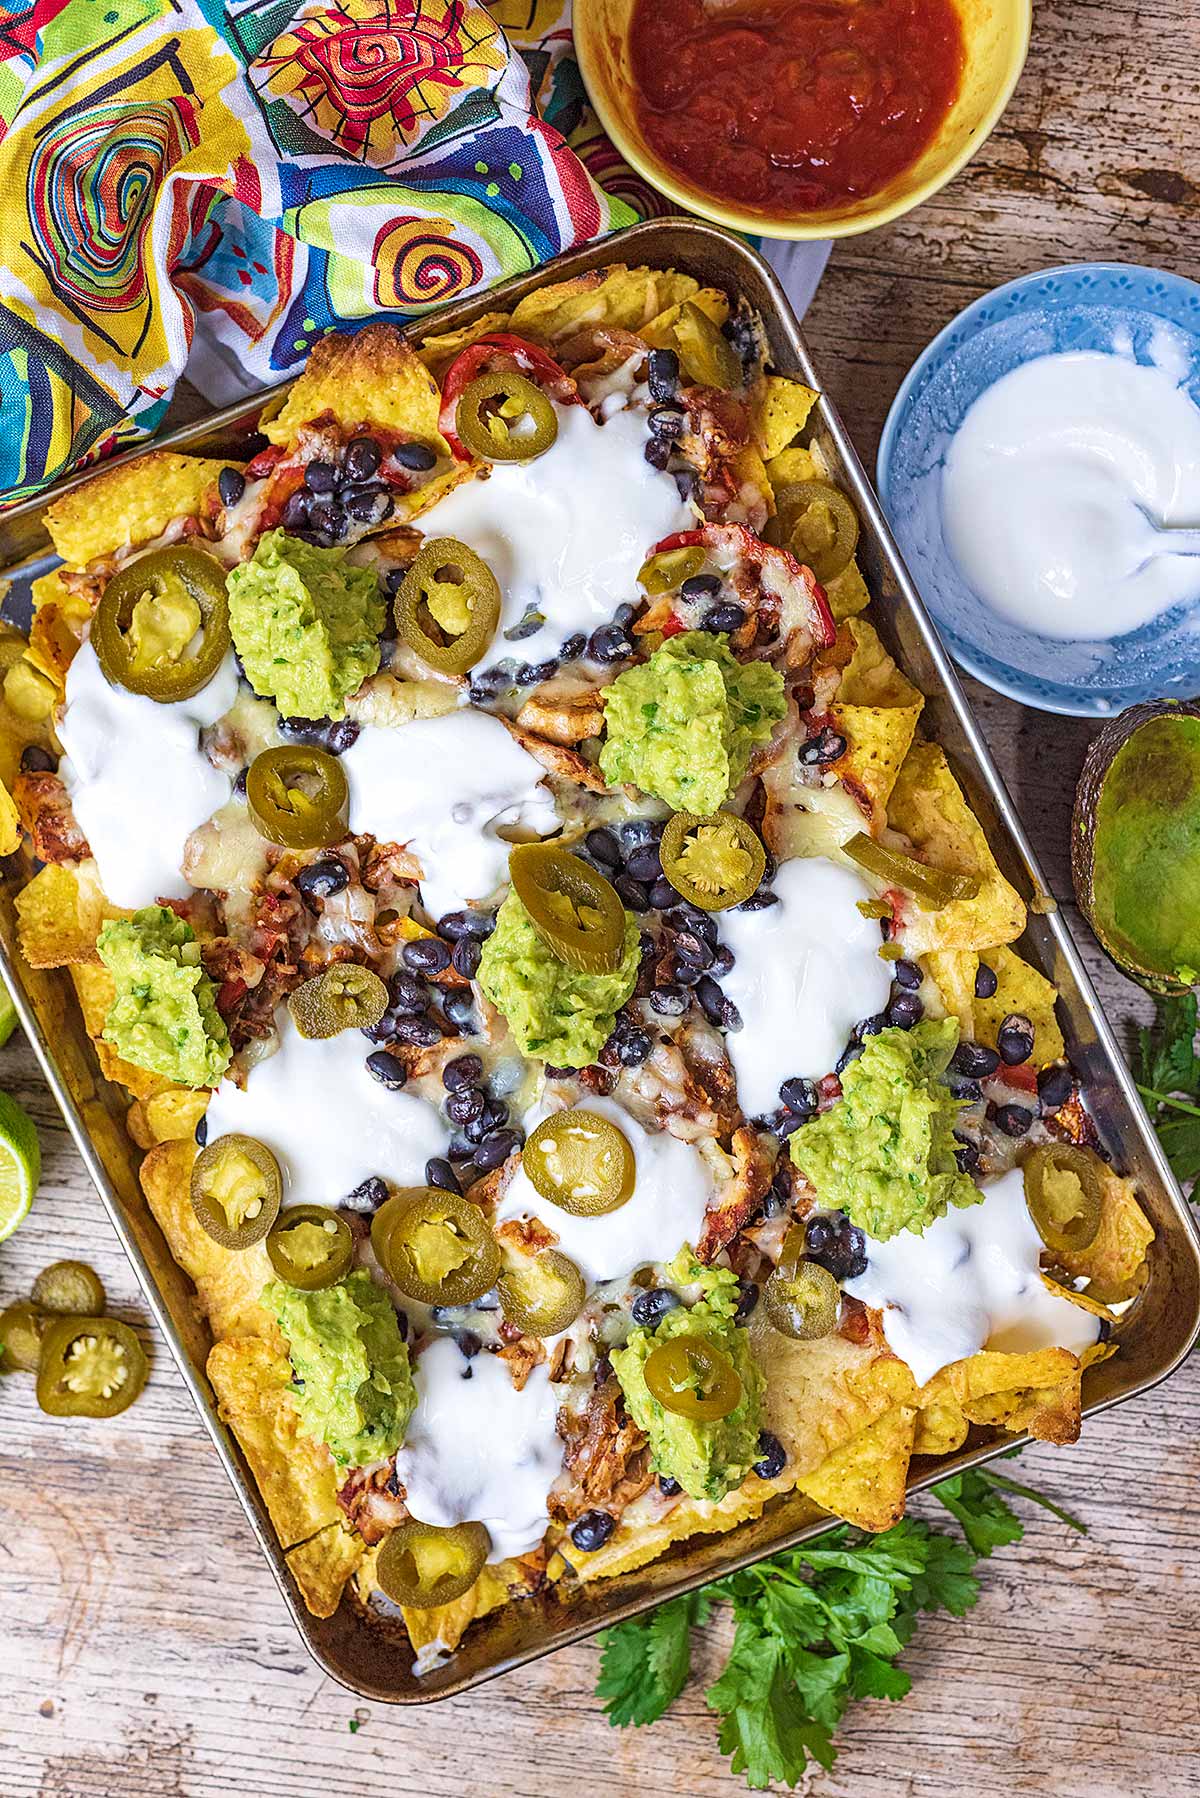 A large tray of nachos topped with sour cream, guacamole and salsa.